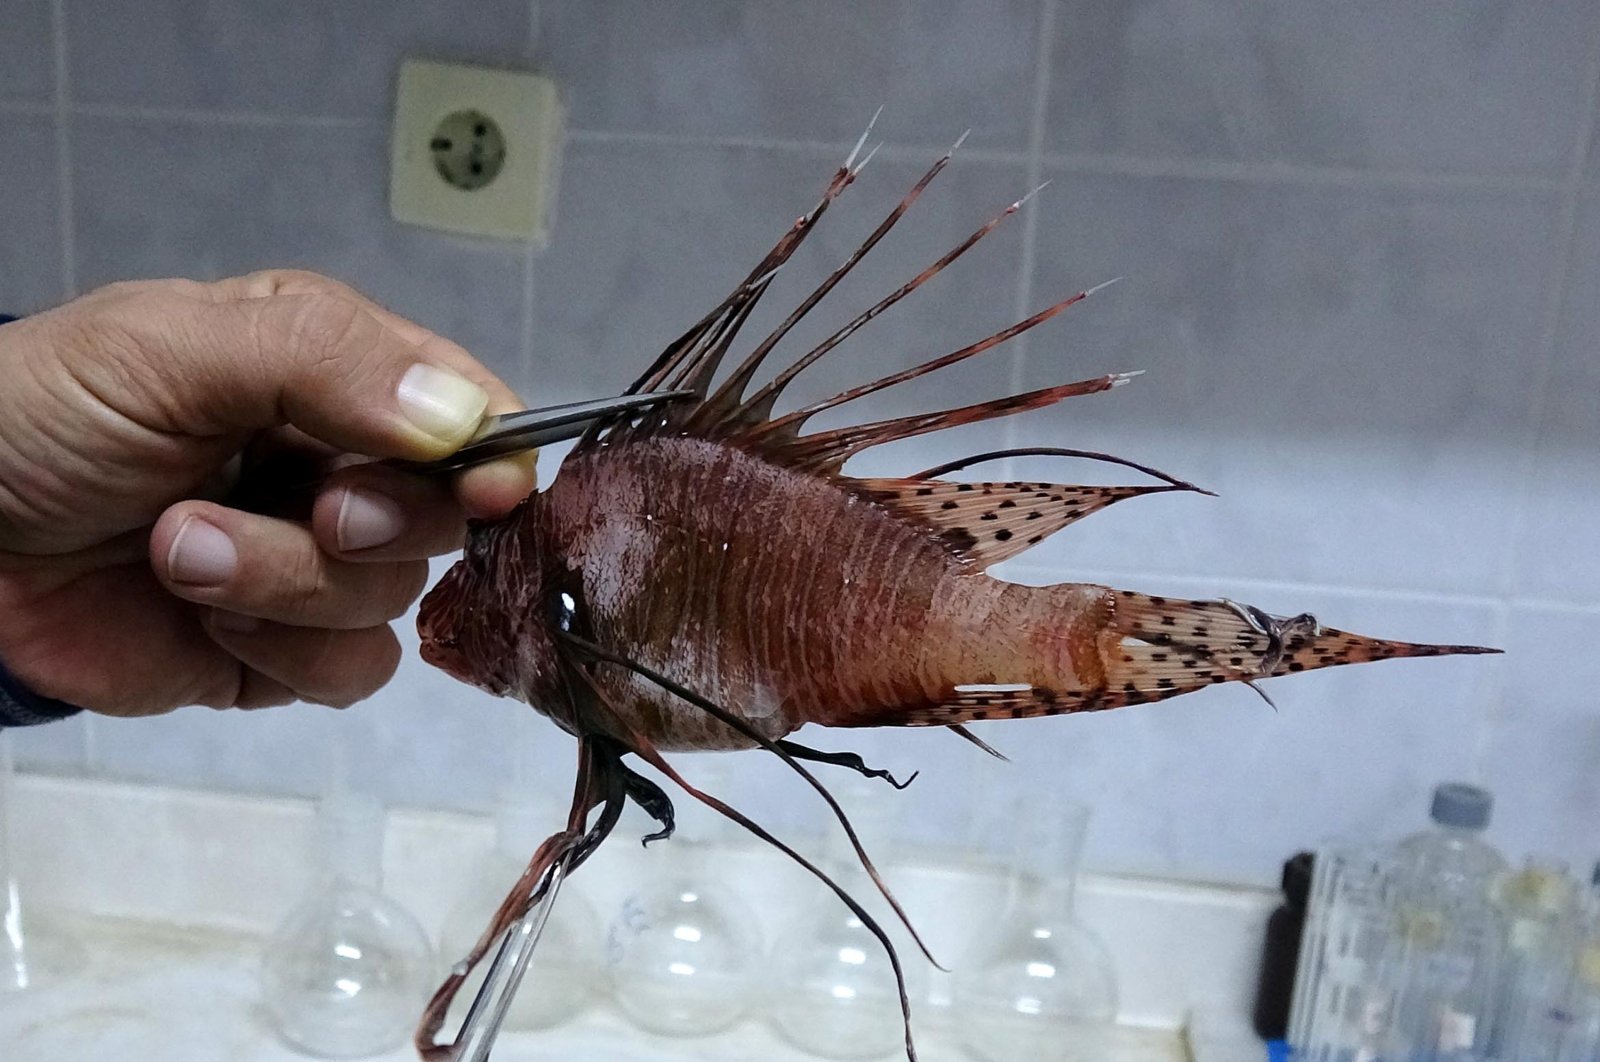 A lionfish caught in Mersin, southern Turkey, Feb. 15, 2020. (DHA Photo)